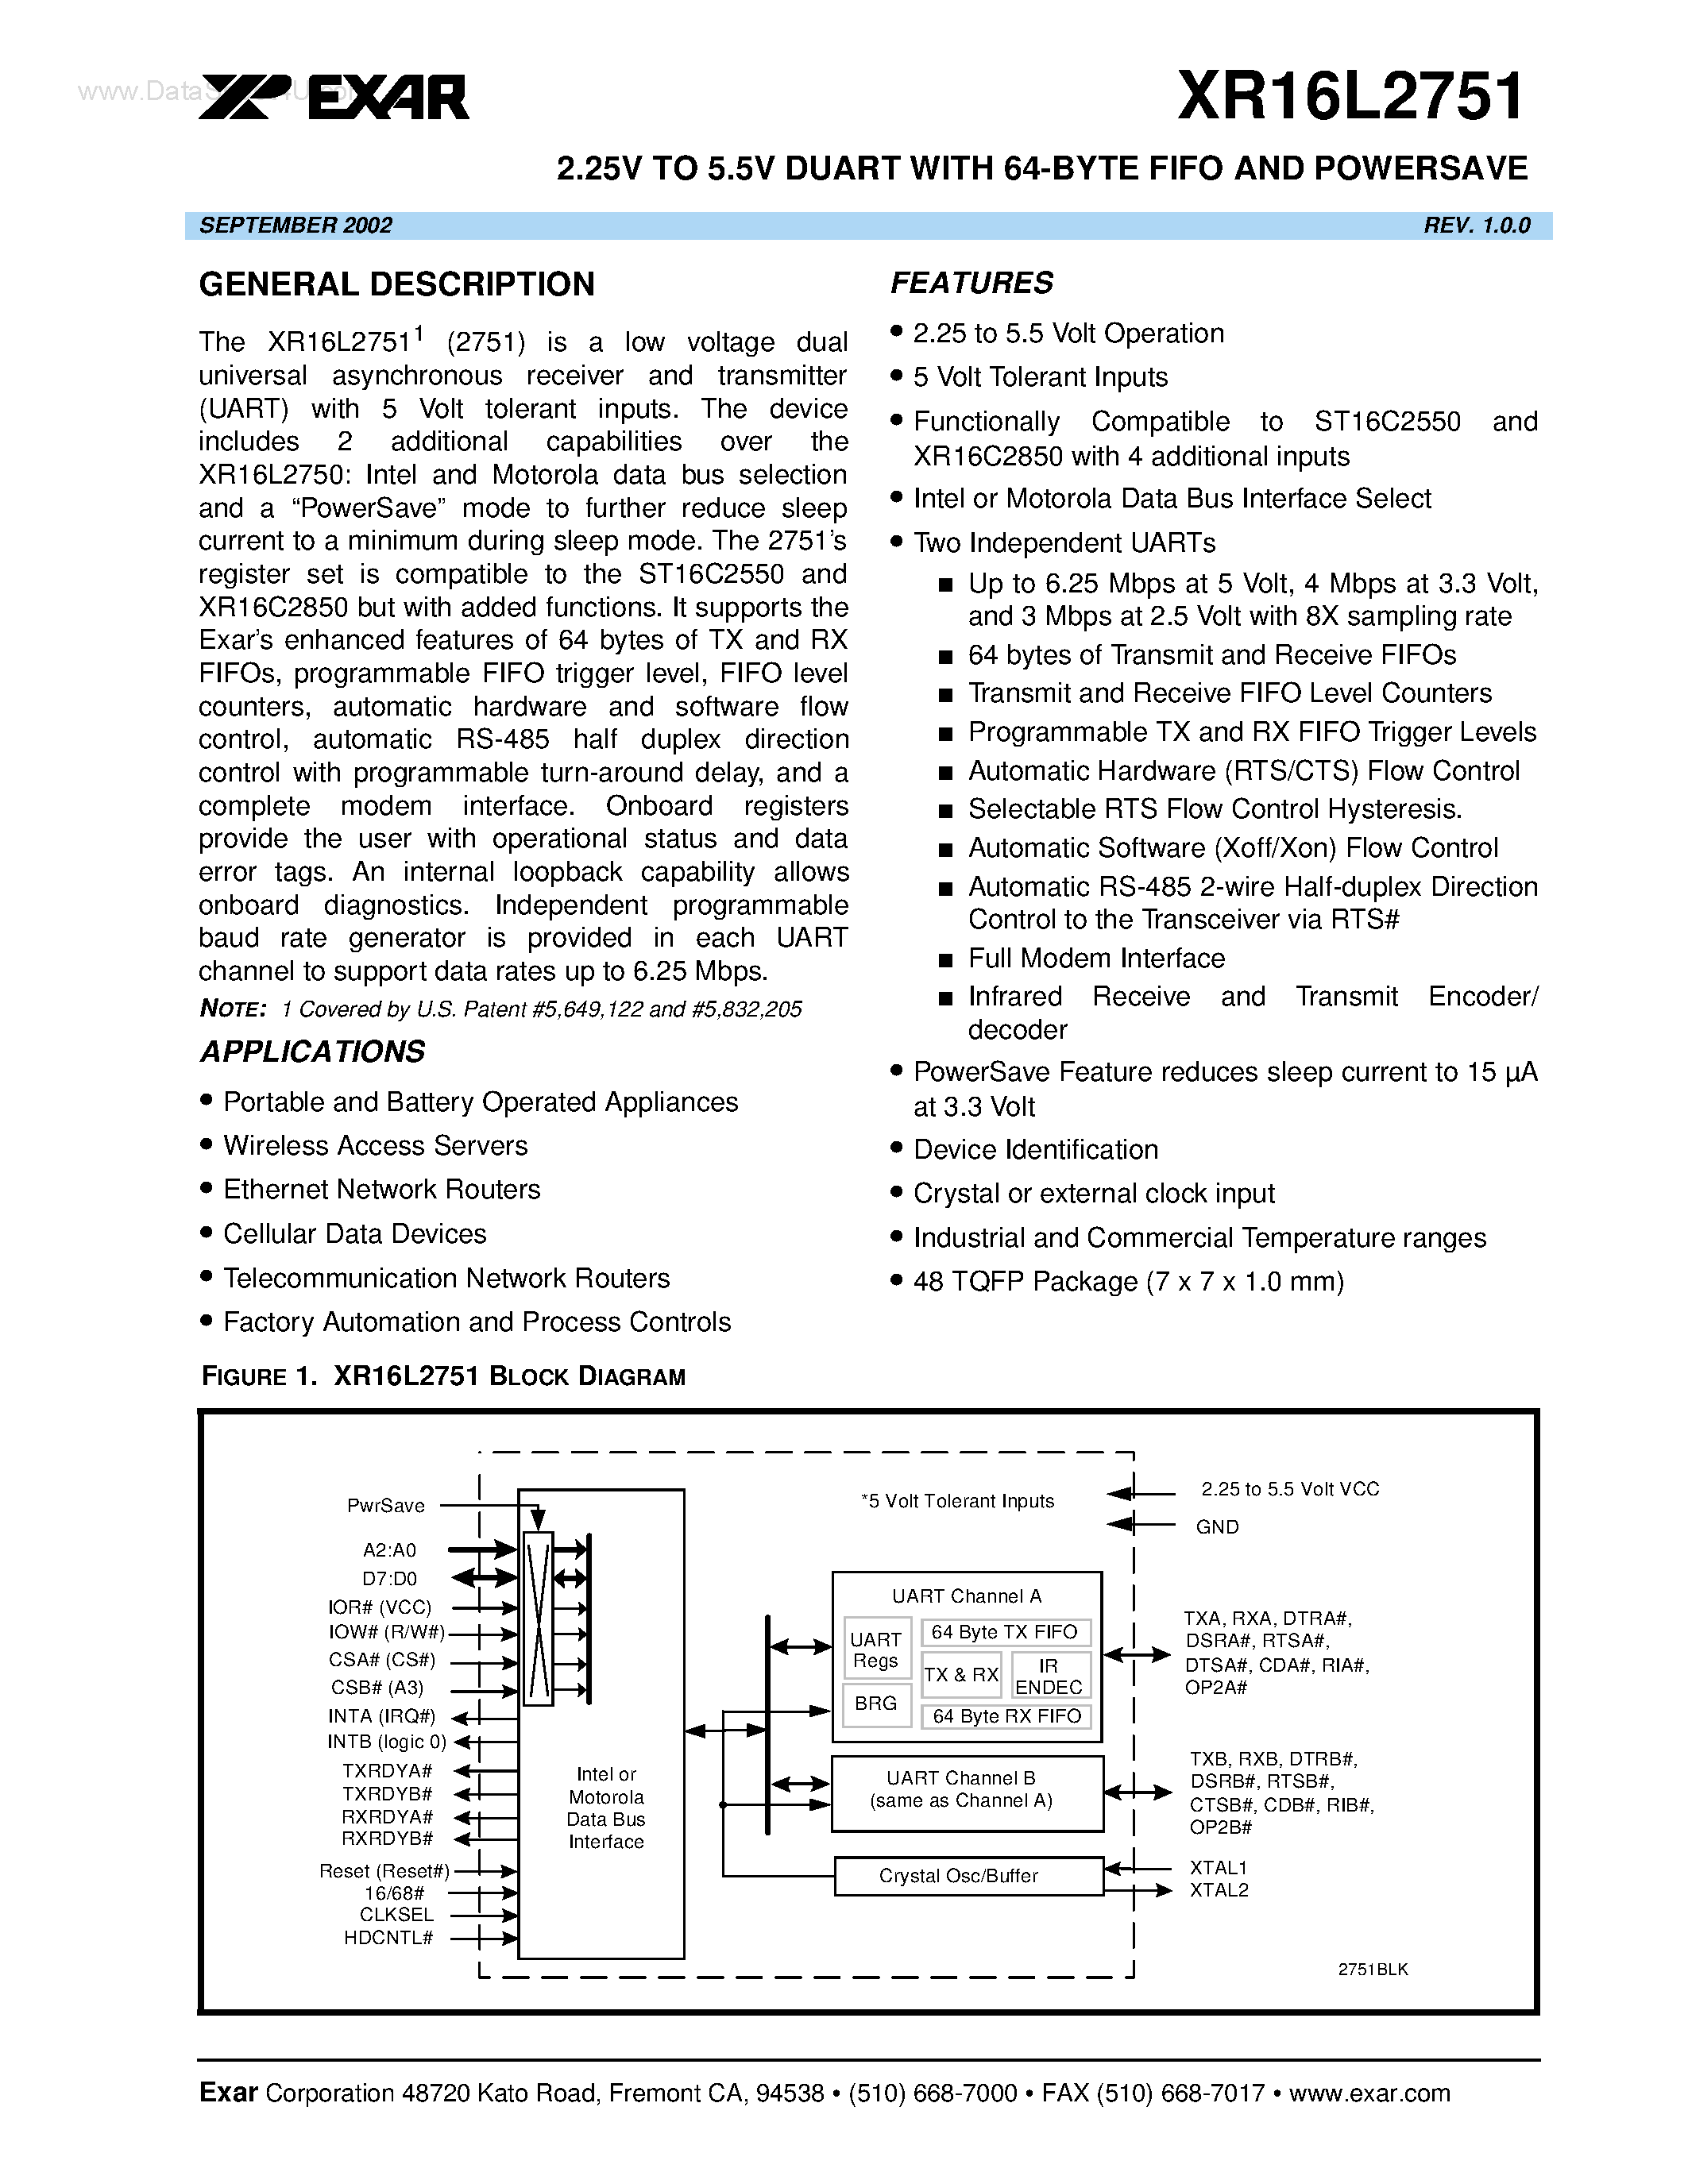 Datasheet XR16L2751IM - 2.25V TO 5.5V DUART WITH 64-BYTE FIFO AND POWERSAVE page 1